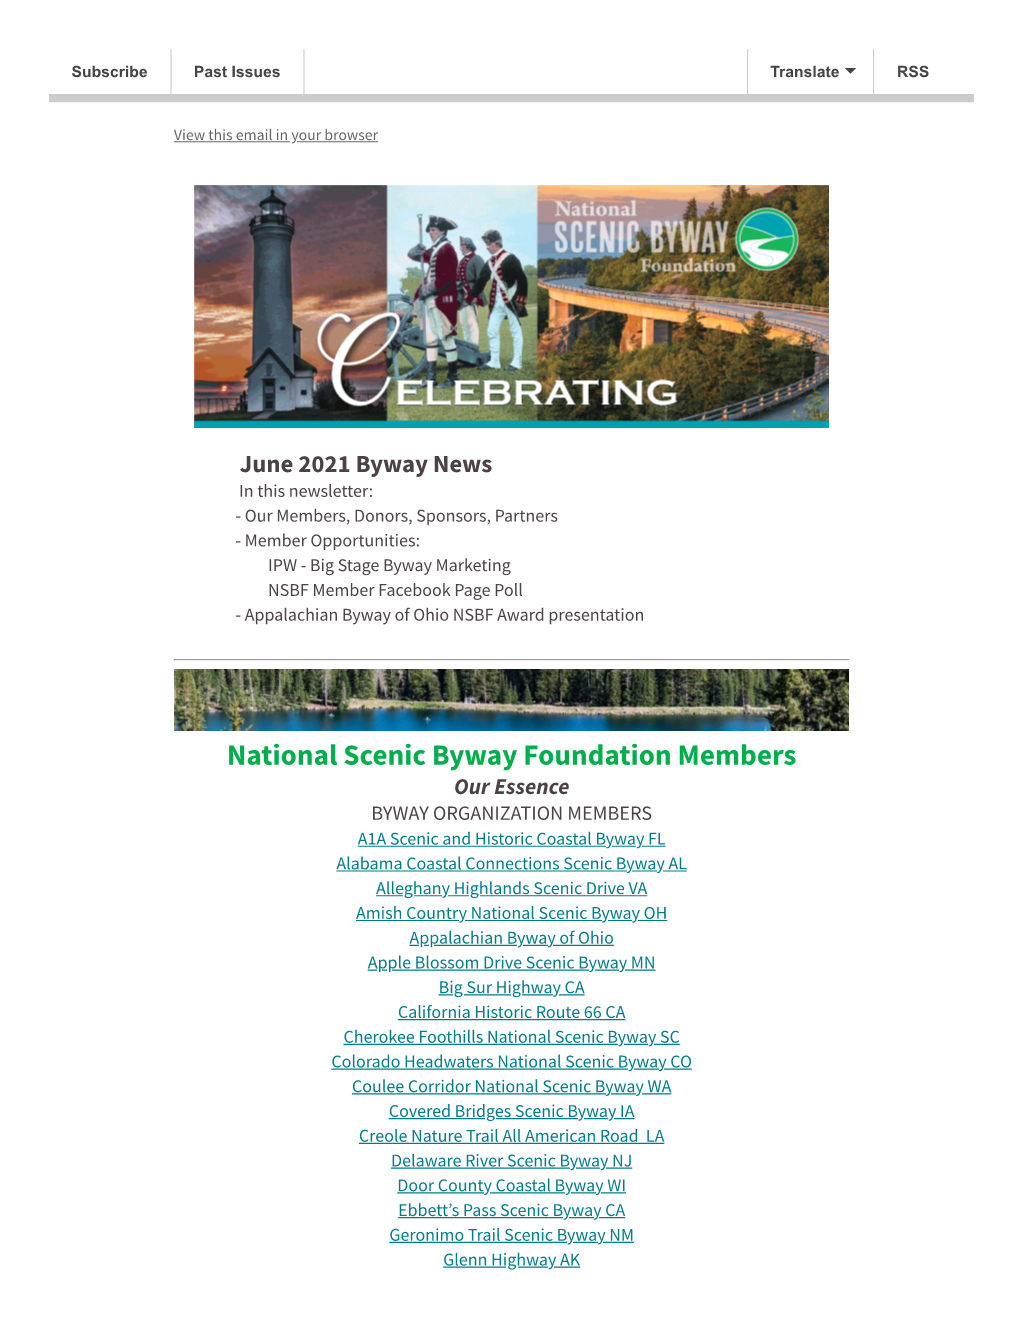 National Scenic Byway Foundation Members